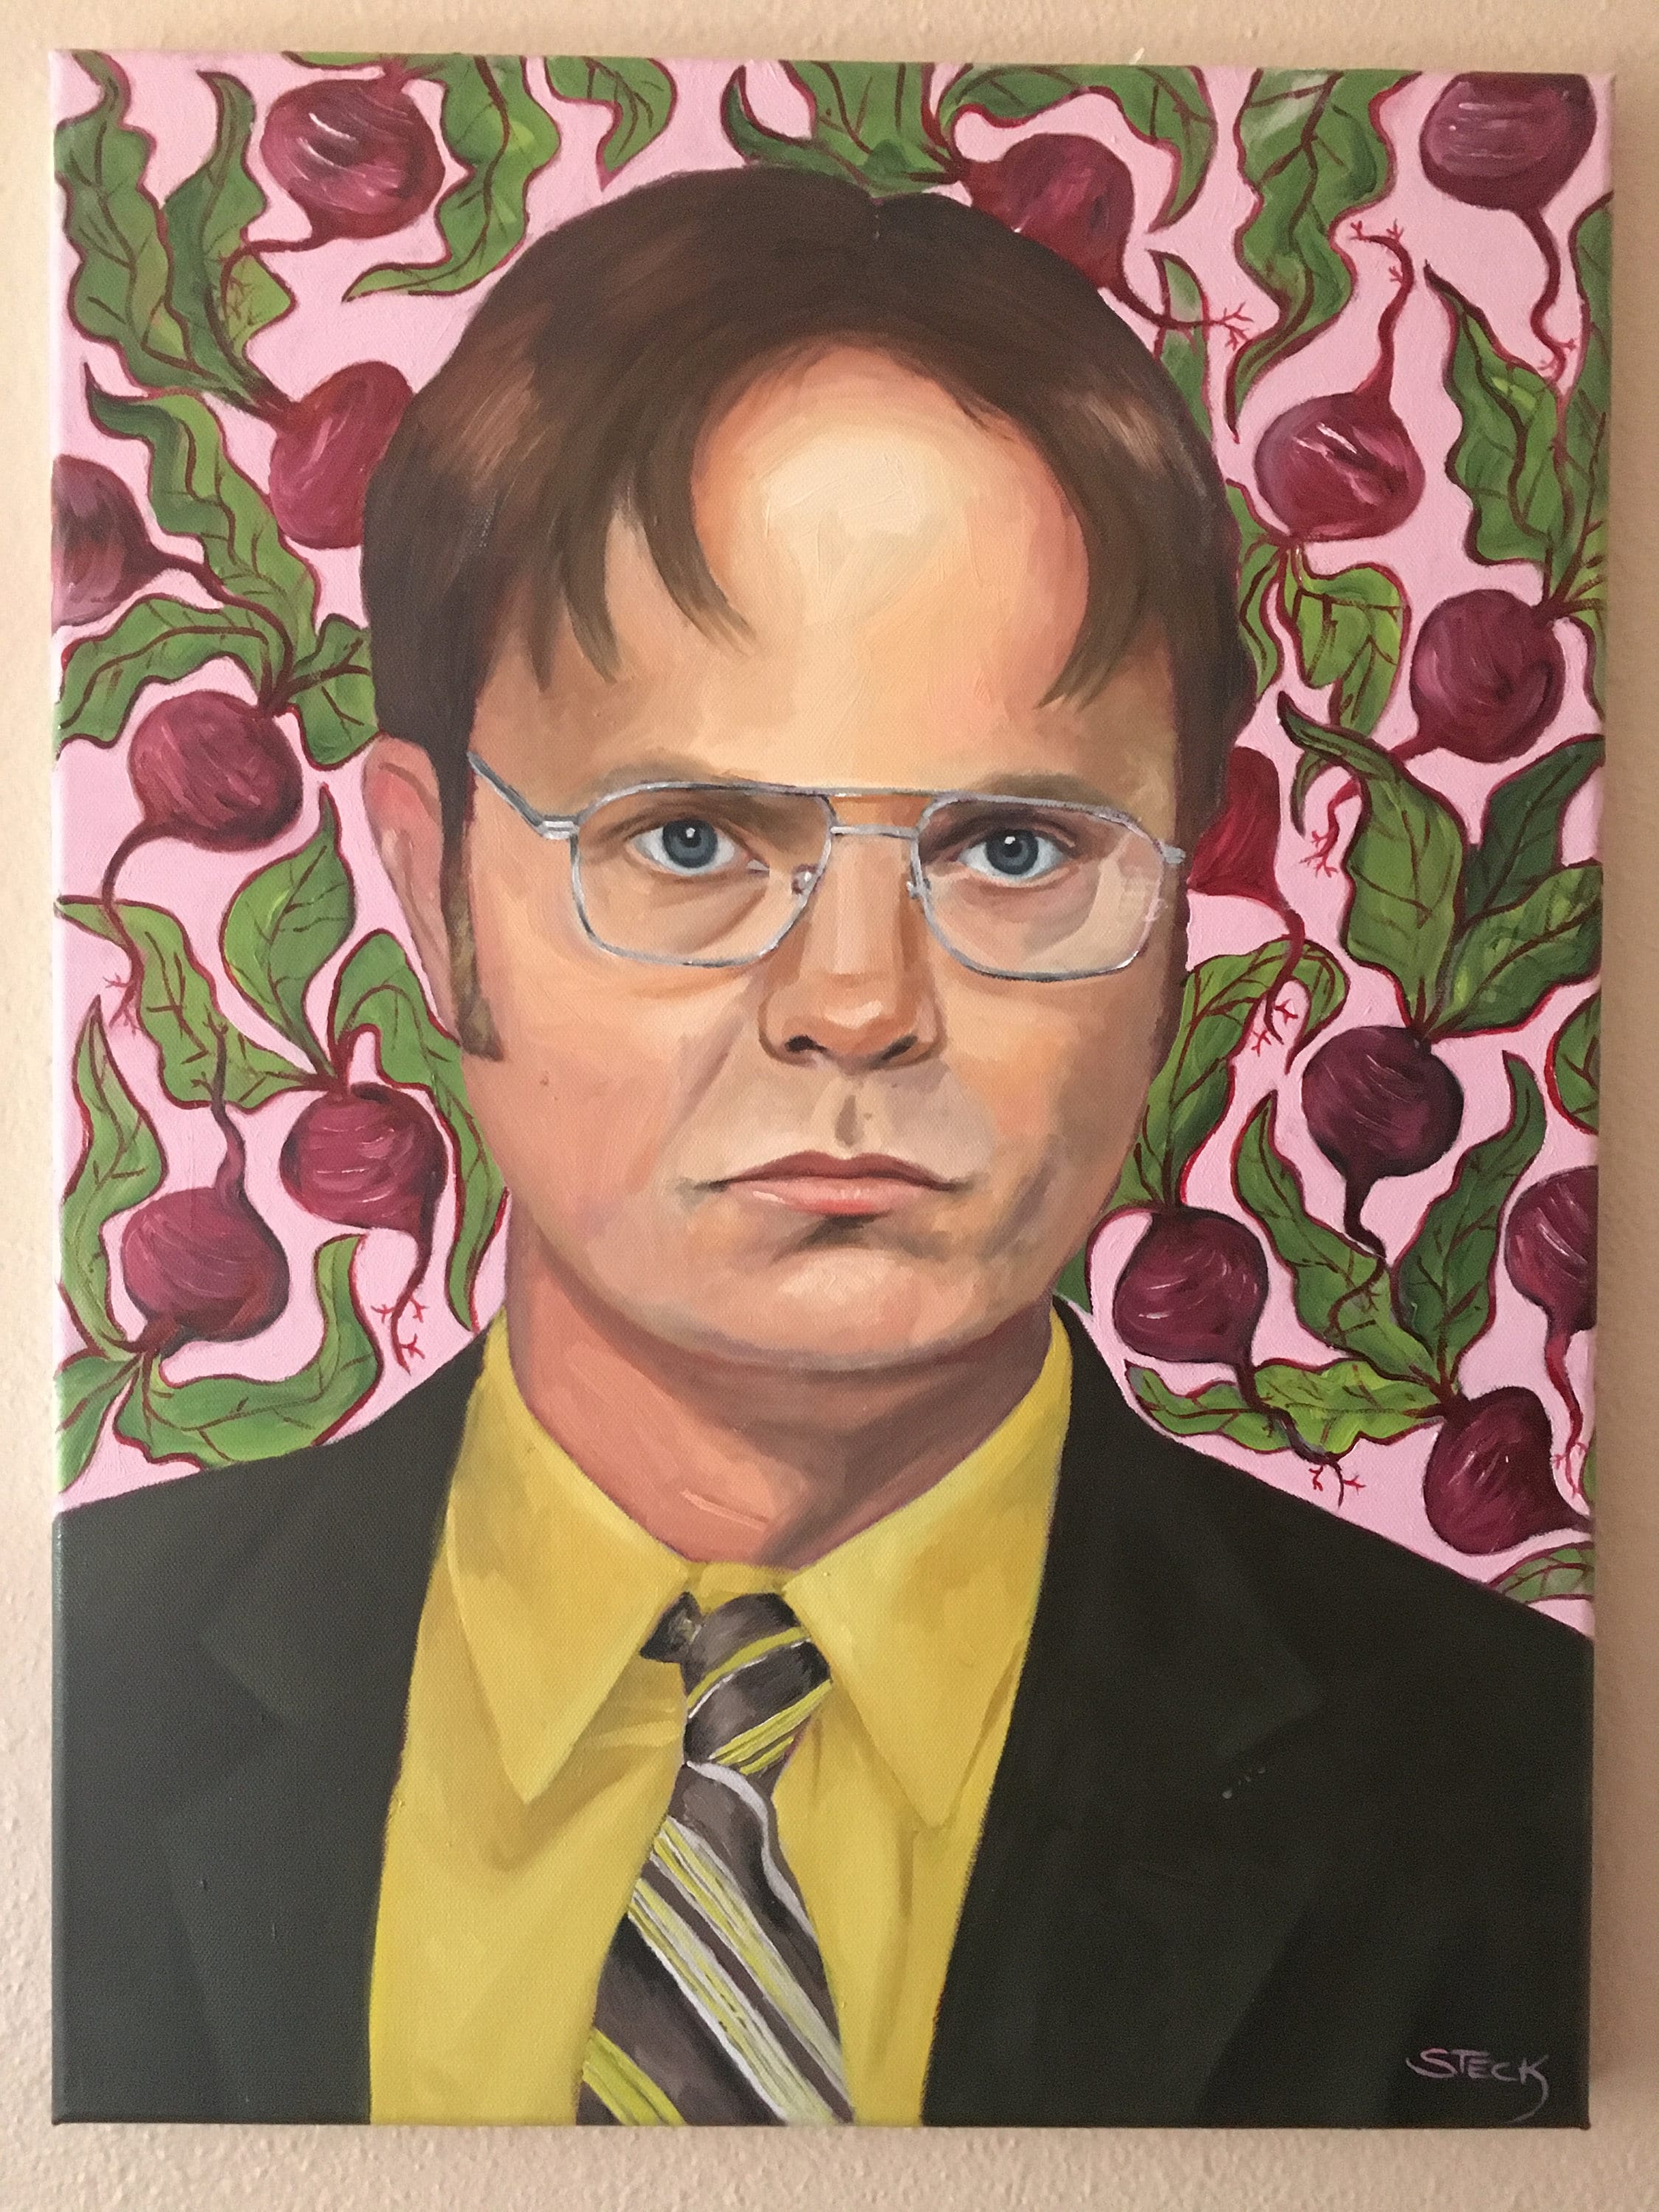 dwight-schrute-gothic-paint-by-number-ubicaciondepersonas-cdmx-gob-mx